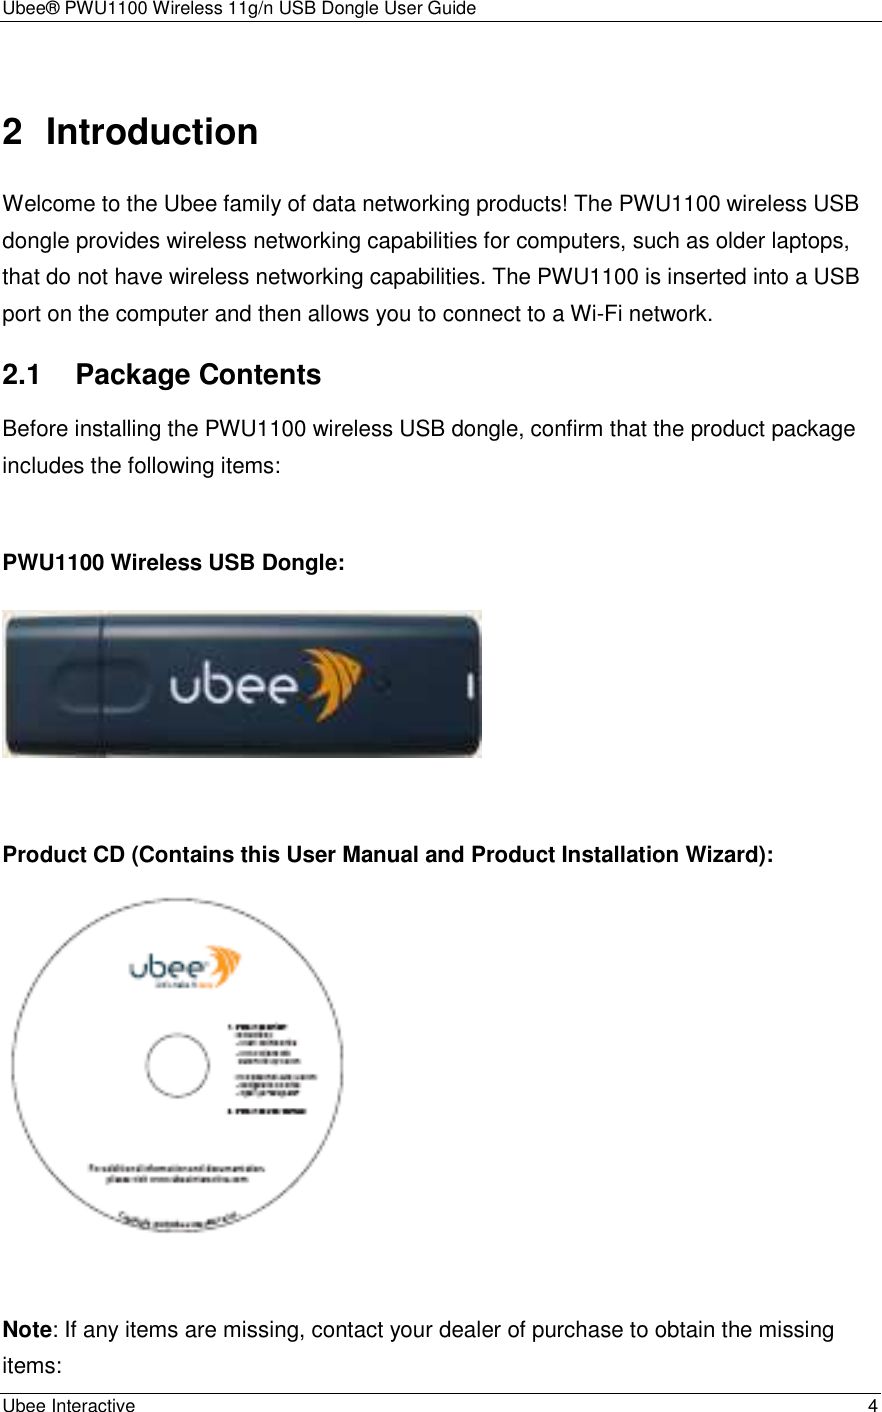 Ubee® PWU1100 Wireless 11g/n USB Dongle User Guide Ubee Interactive    4 2  Introduction Welcome to the Ubee family of data networking products! The PWU1100 wireless USB dongle provides wireless networking capabilities for computers, such as older laptops, that do not have wireless networking capabilities. The PWU1100 is inserted into a USB port on the computer and then allows you to connect to a Wi-Fi network. 2.1 Package Contents Before installing the PWU1100 wireless USB dongle, confirm that the product package includes the following items:  PWU1100 Wireless USB Dongle:   Product CD (Contains this User Manual and Product Installation Wizard):   Note: If any items are missing, contact your dealer of purchase to obtain the missing items: 